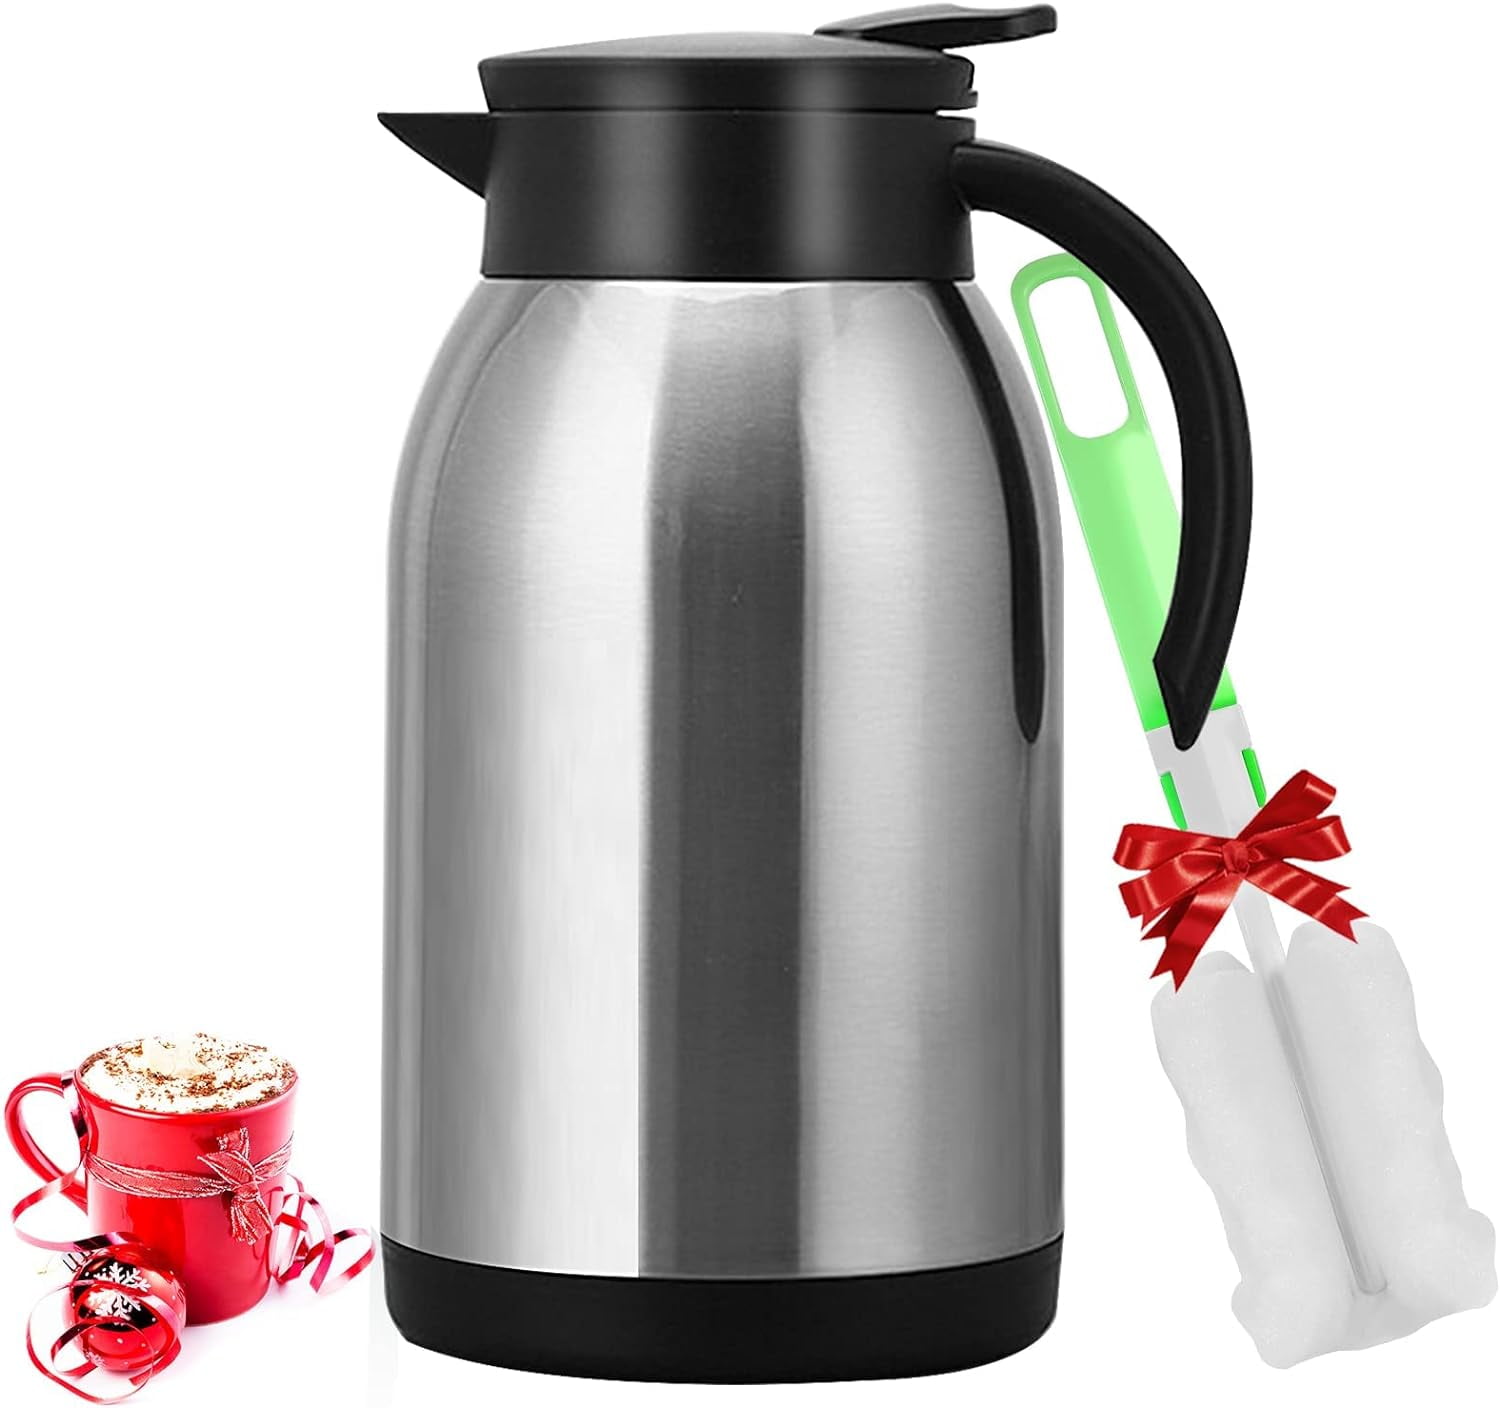 Karafe: Insulated Stainless Steel Pot for Holding Hot Water - Tea Dogu